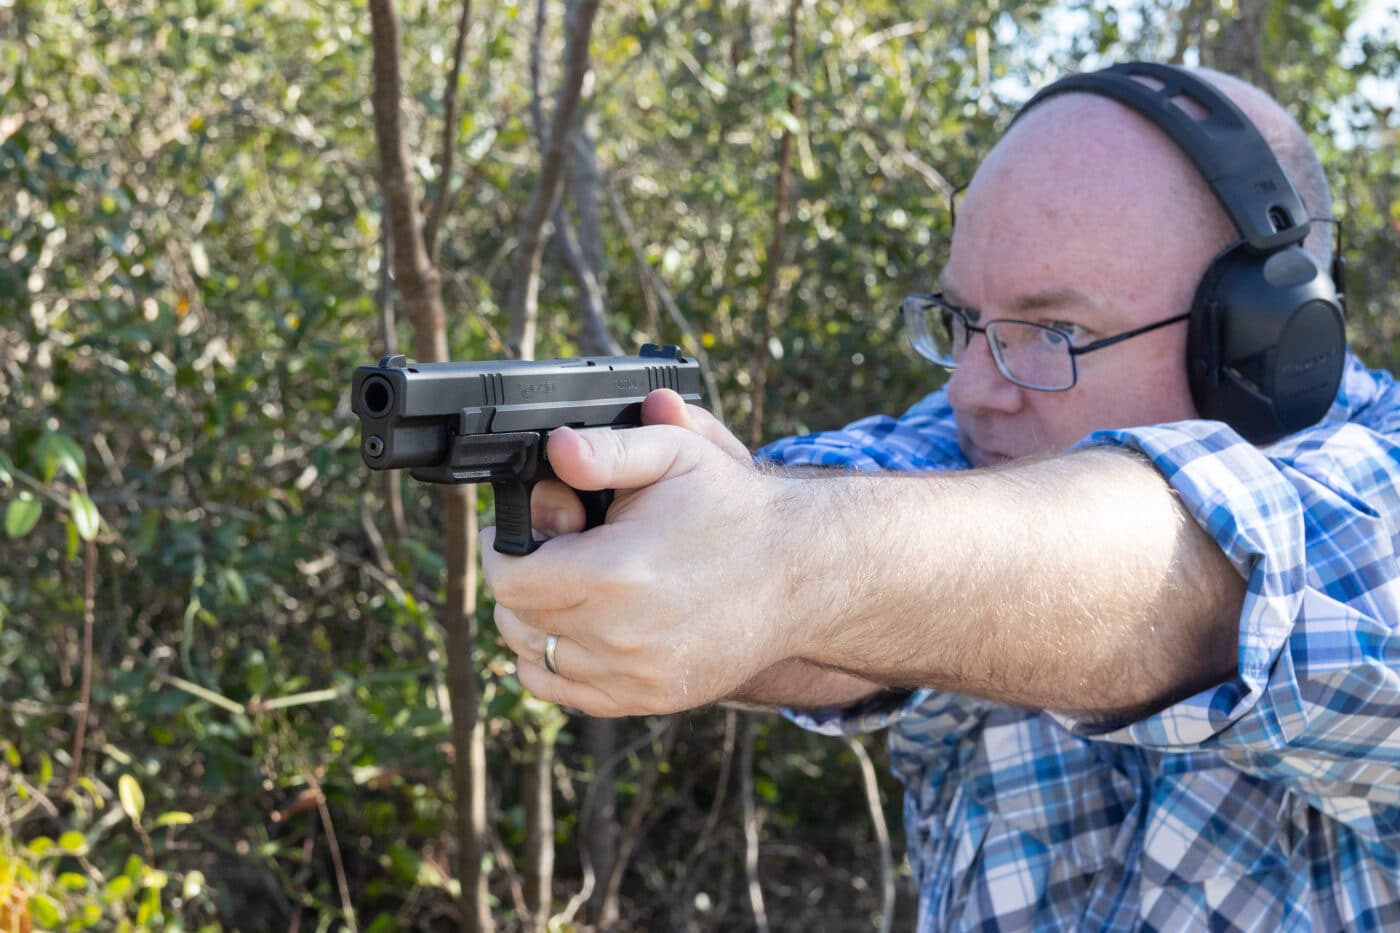 Author shooting the Springfield XD40 Tactical pistol being reviewed